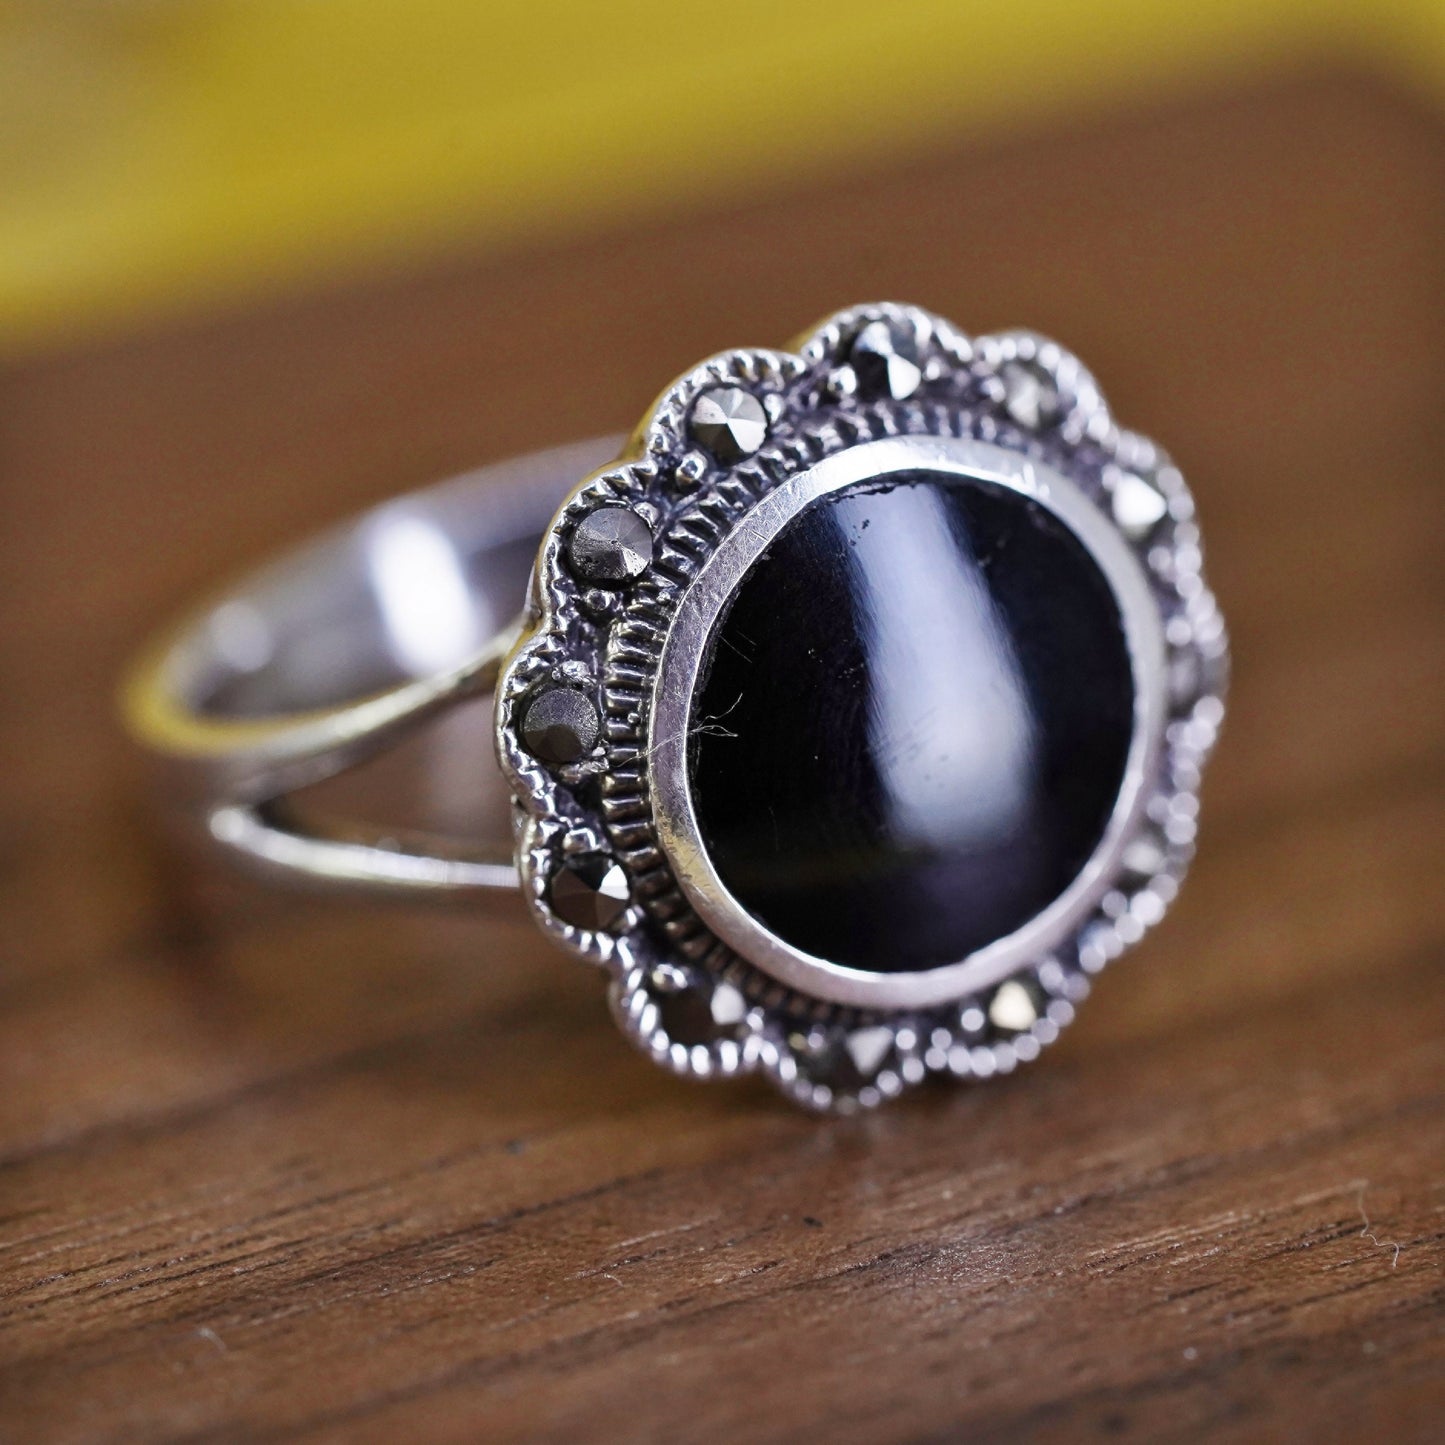 Size 9.25, Sterling 925 silver handmade ring with black onyx and marcasite